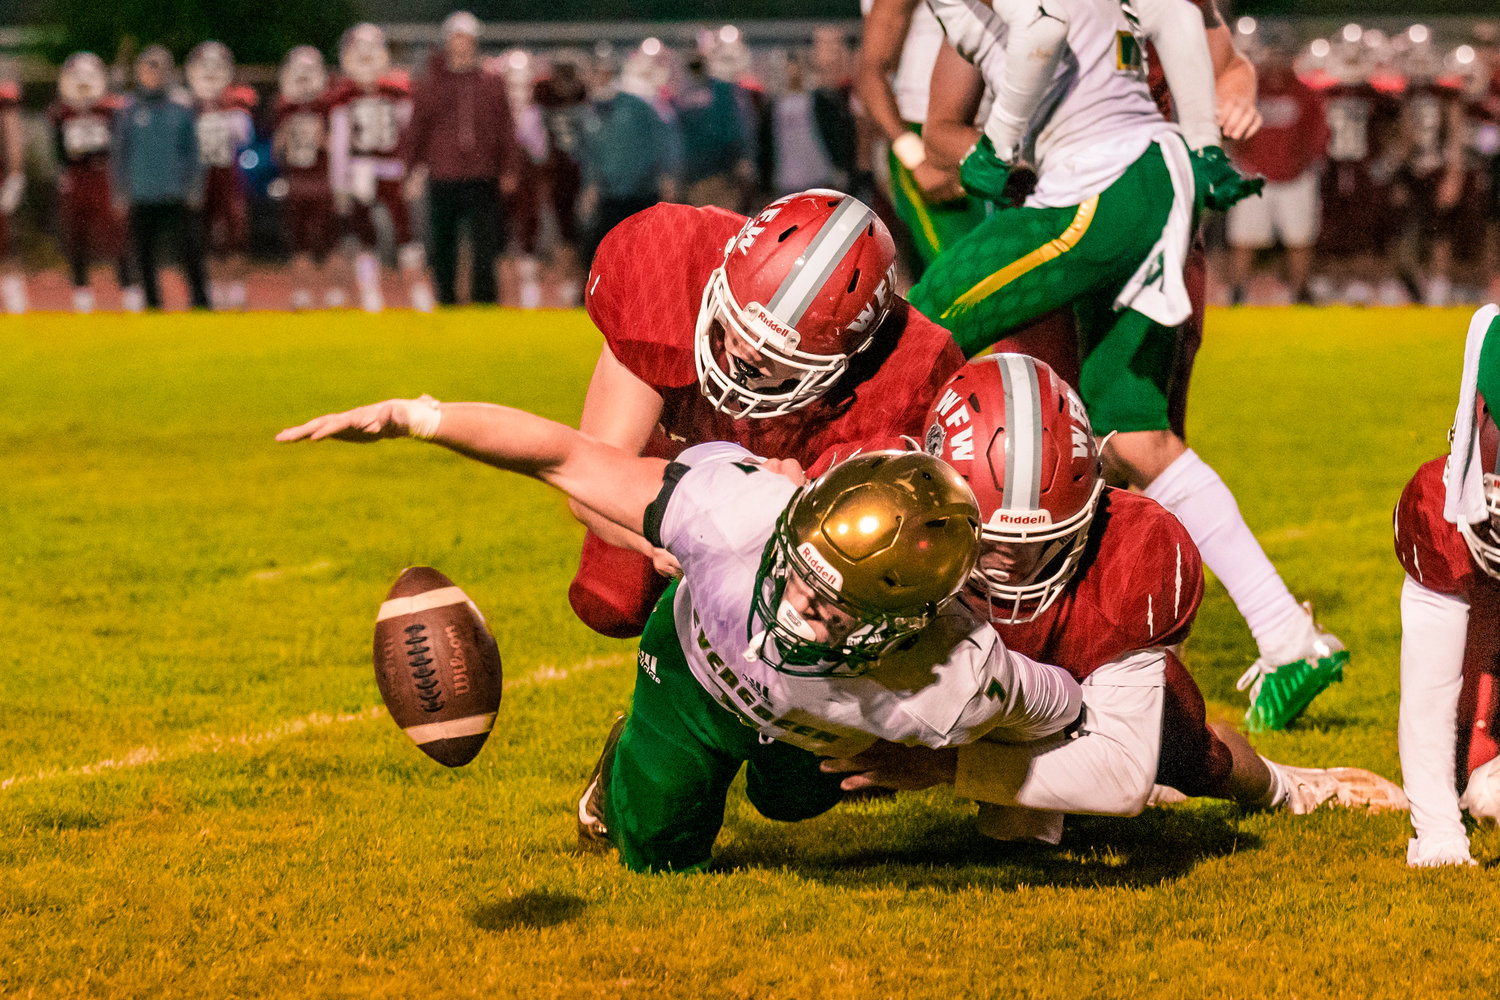 Bearcats force a fumble and take possession during a game against Evergreen Friday night in Chehalis.